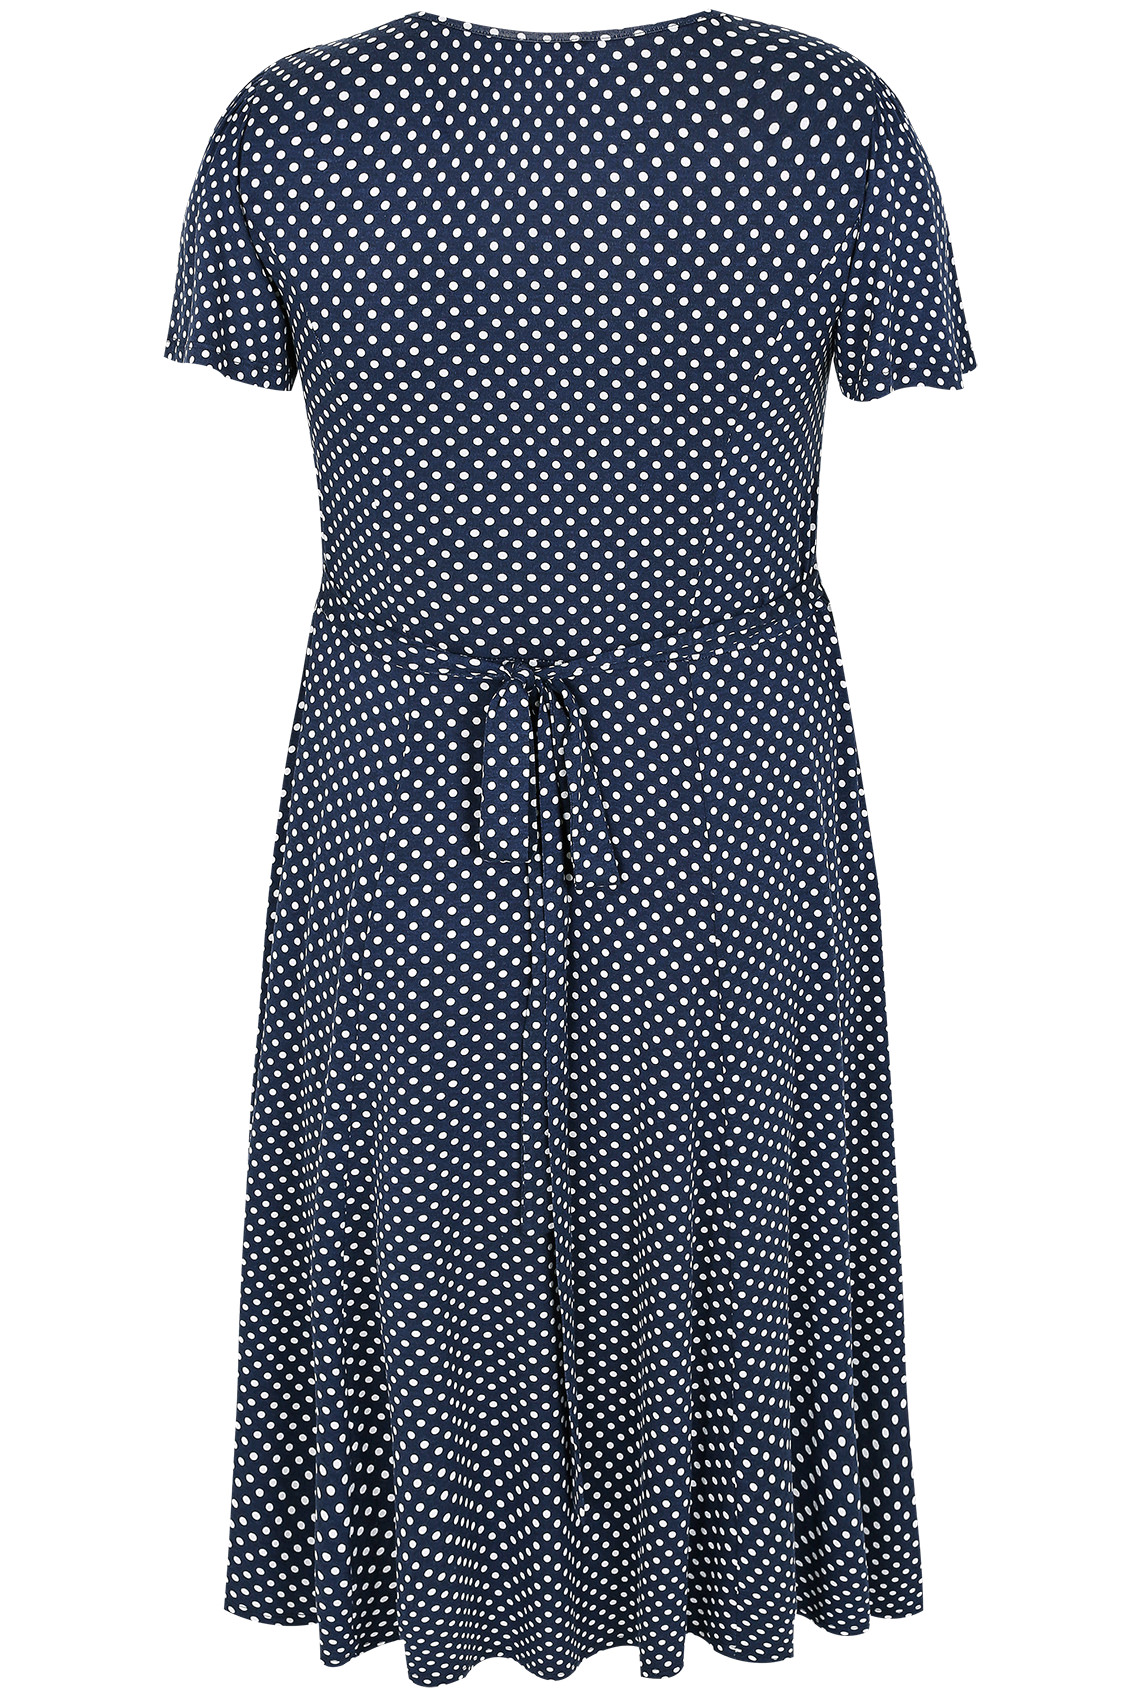 Navy & White Polka Dot Fit & Flare Dress With Waist Tie, Plus size 16 to 36